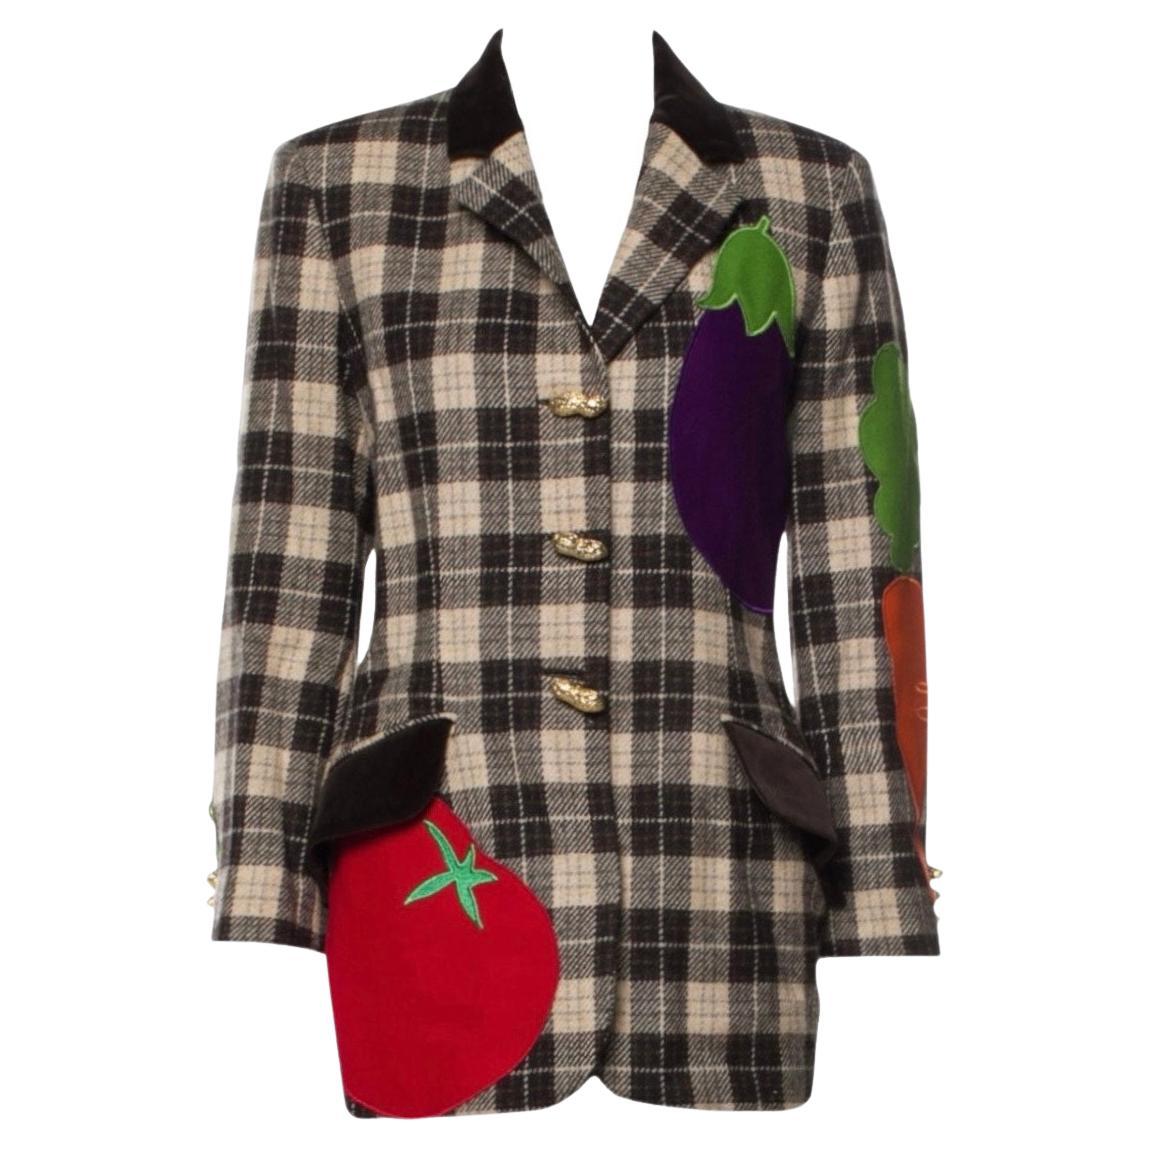 Moschino Cheap & Chic Vintage Vegetable Jacket as seen on the Nanny